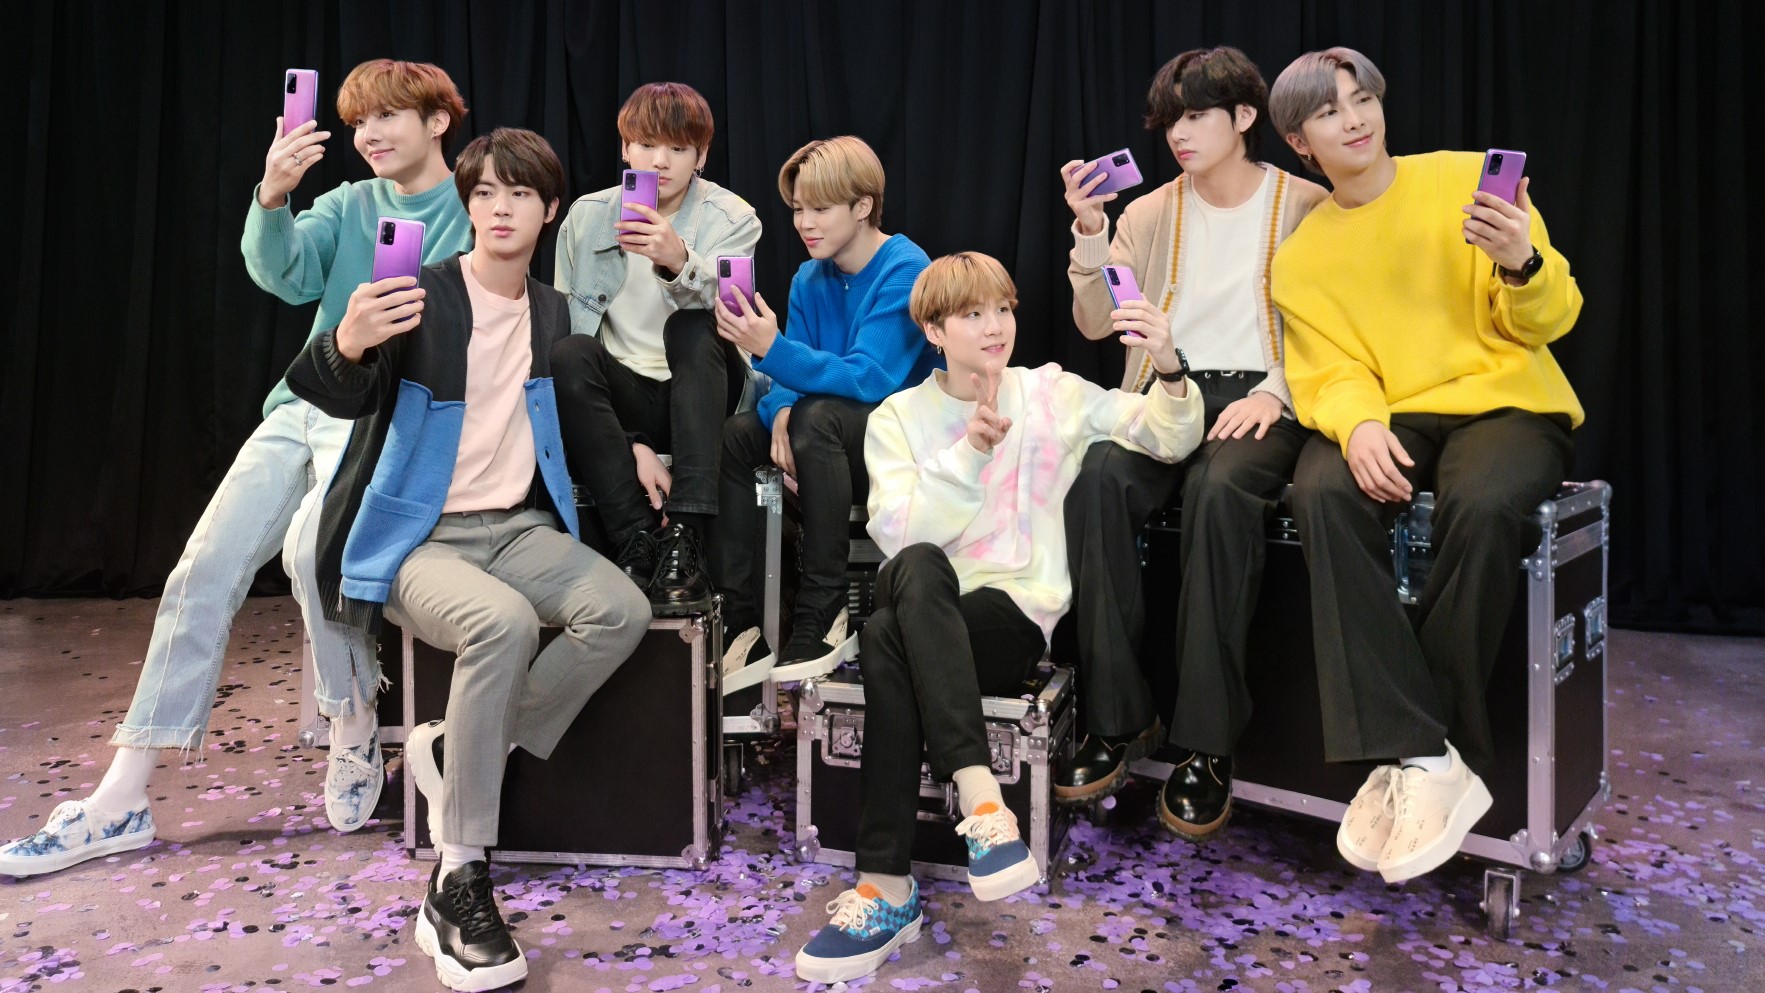 Samsung Galaxy S20 Plus BTS edition means the phone comes